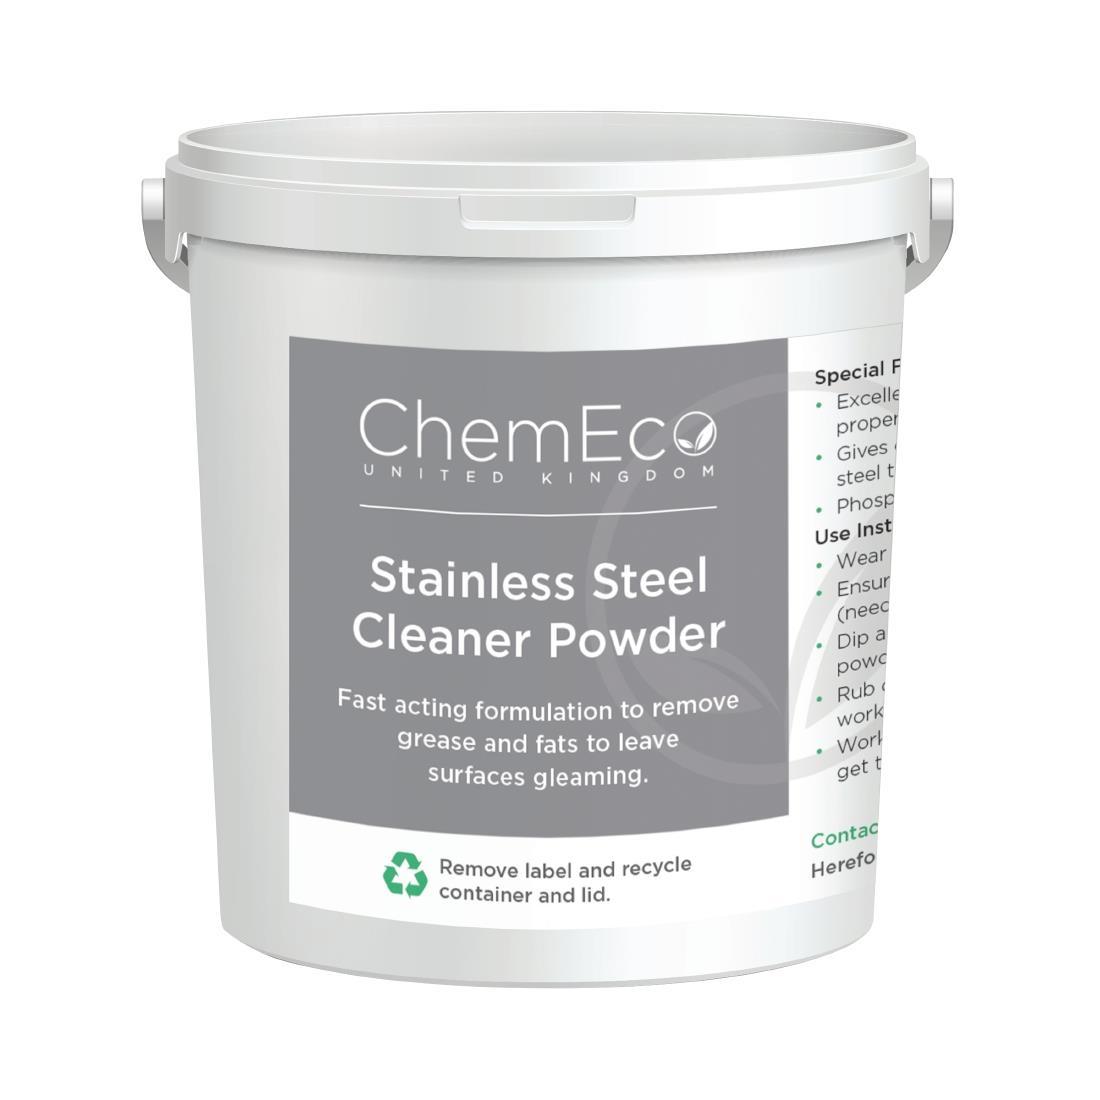 ChemEco Stainless Steel Cleaner Powder 1kg (Pack of 4) - FN635  - 1